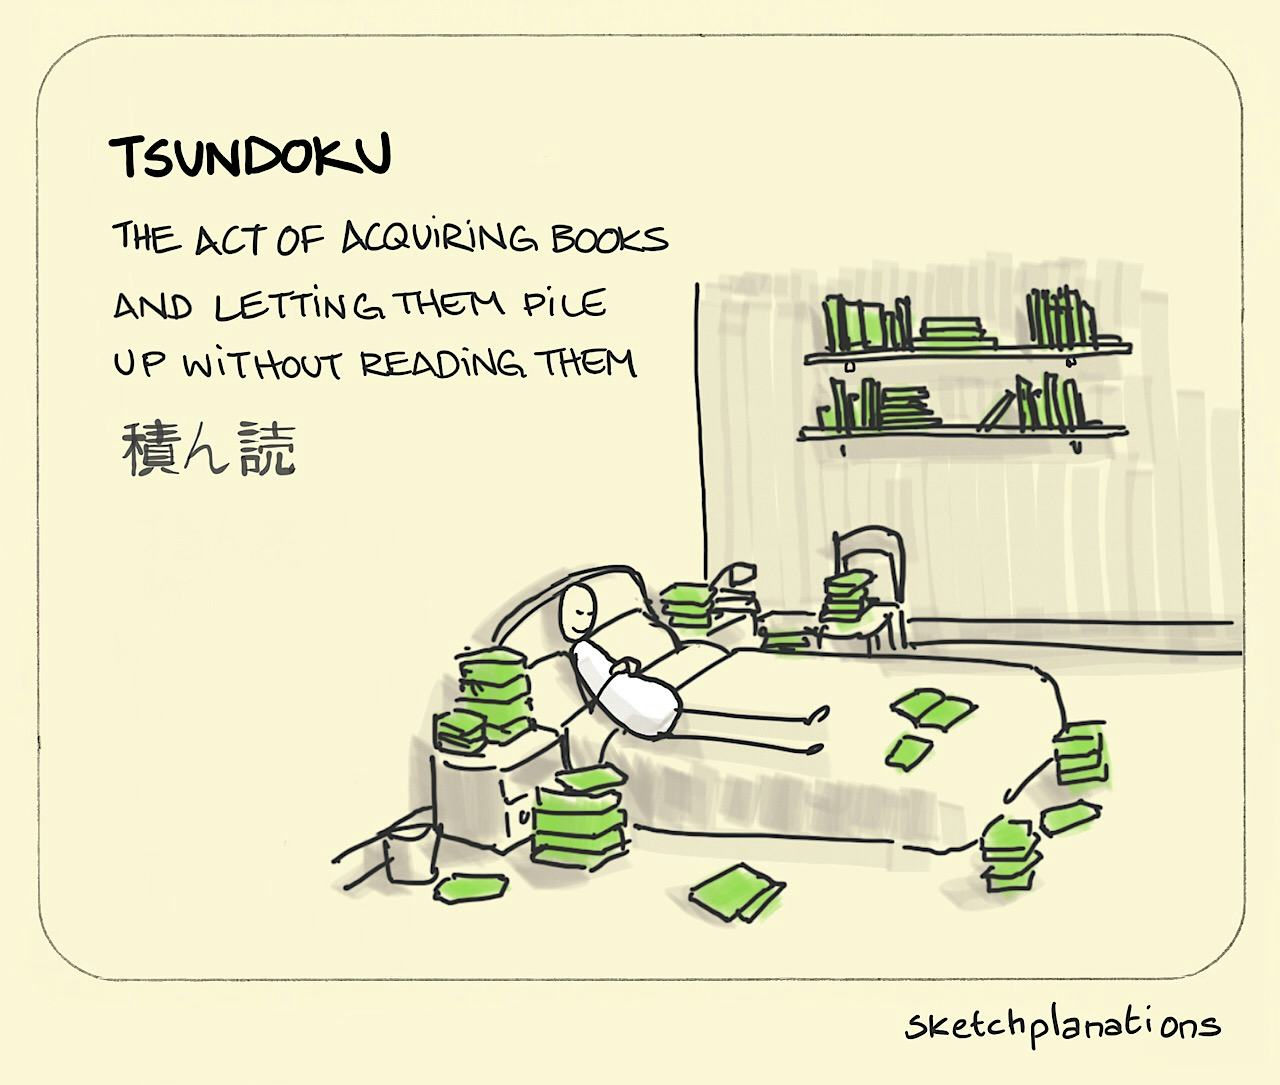 Tsundoku: A person snoozes happily on their bed surrounded by books, books and books